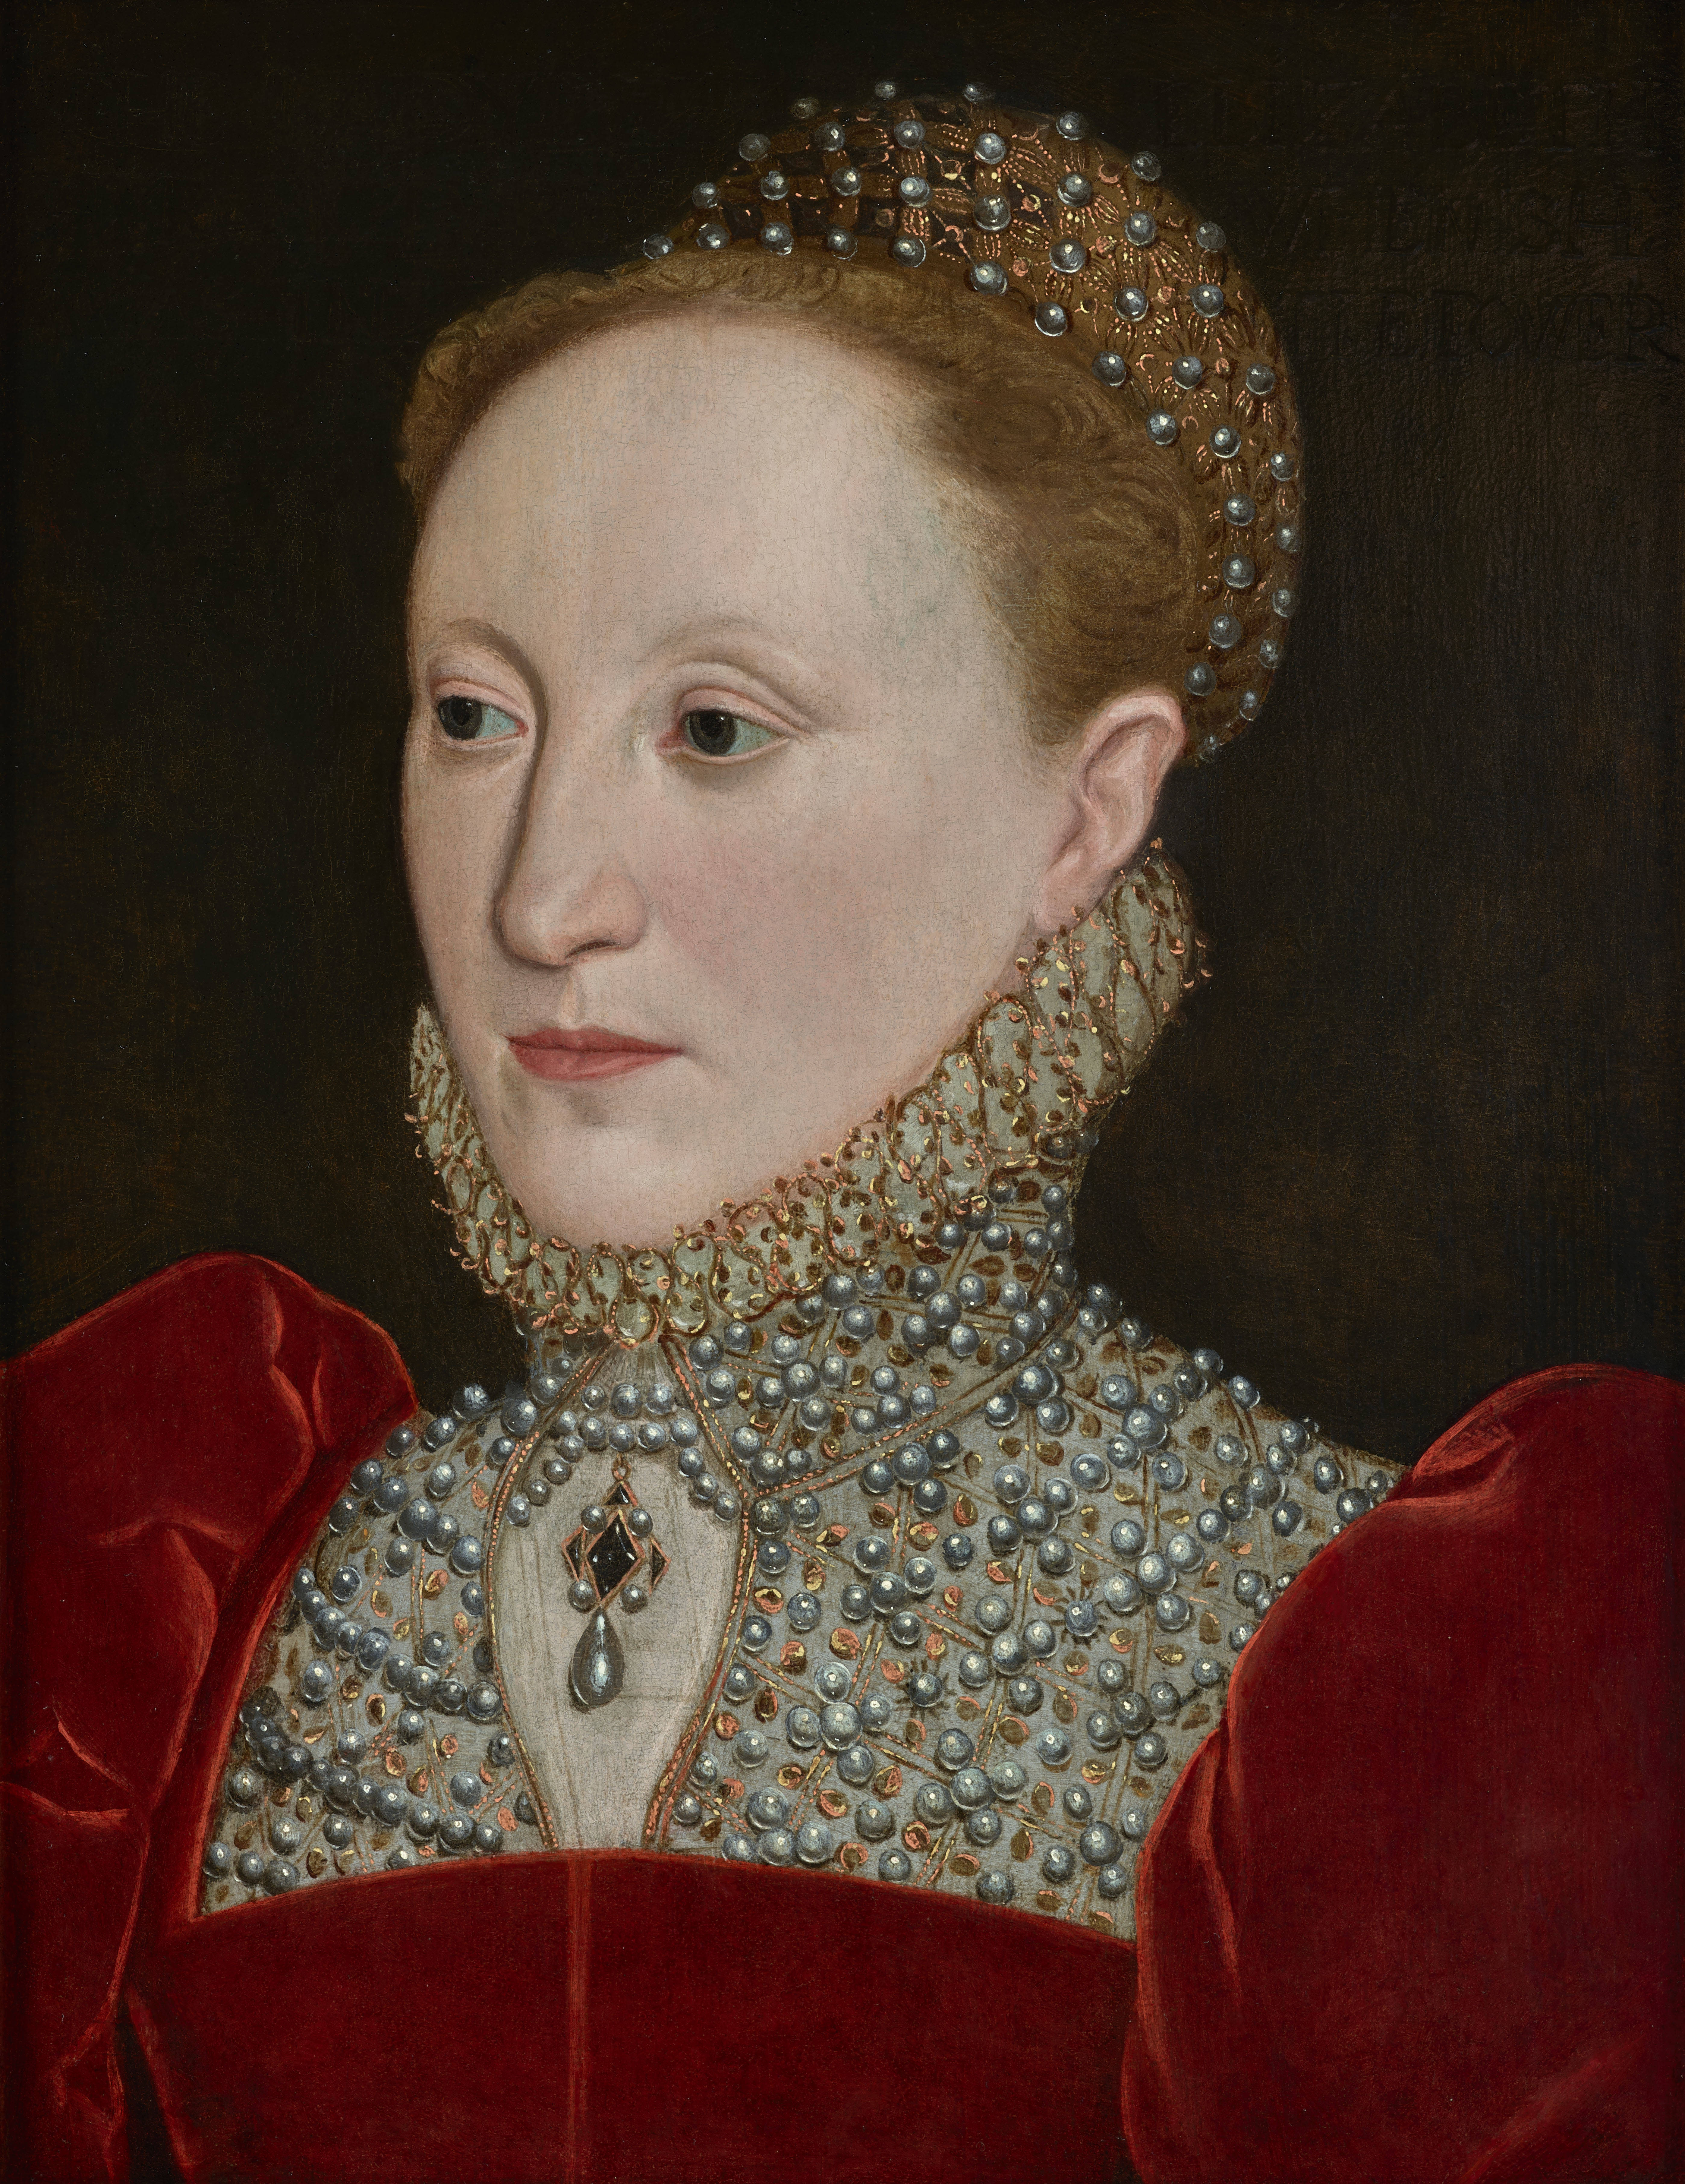 The Human Face of Elizabeth I of England, portrait from the 1560s